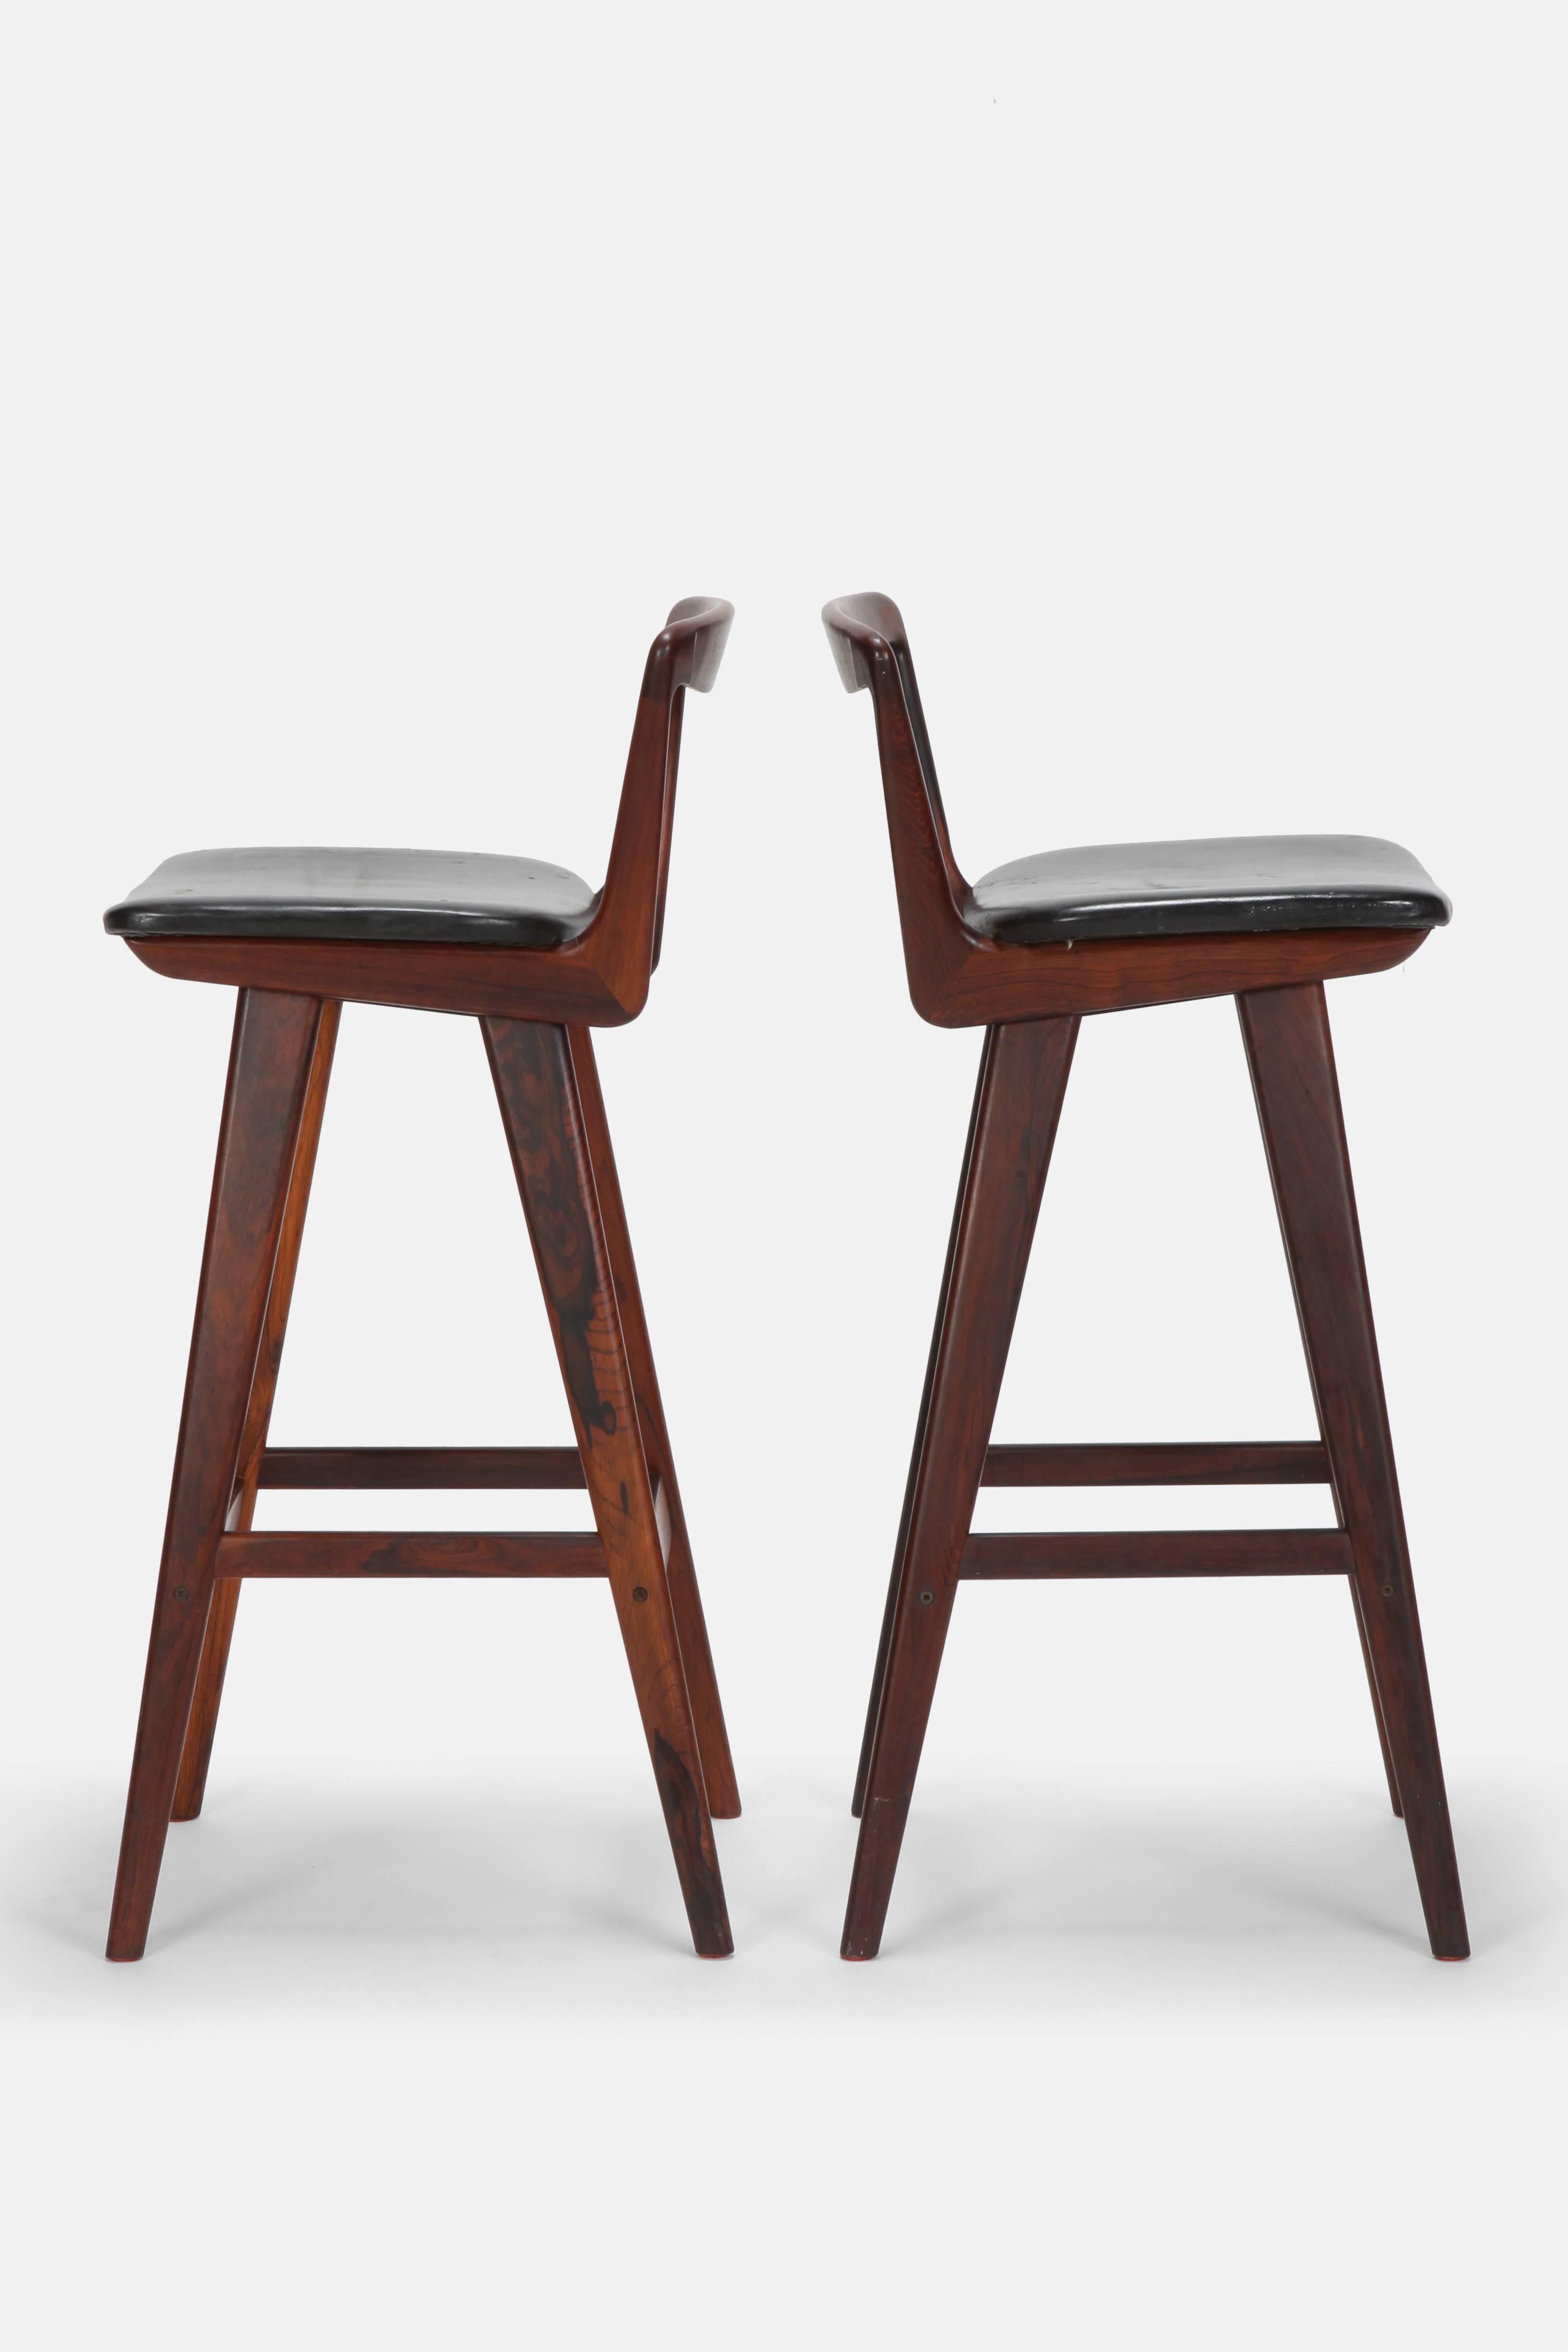 Henry Rosengren Hansen bar stools manufactured by Brande Møbelindustri in the 1960s in Denmark. Two very elegant bar stools with sophisticated processed rosewood frames. The seats have a comfortable upholstery covered with black leather which has a